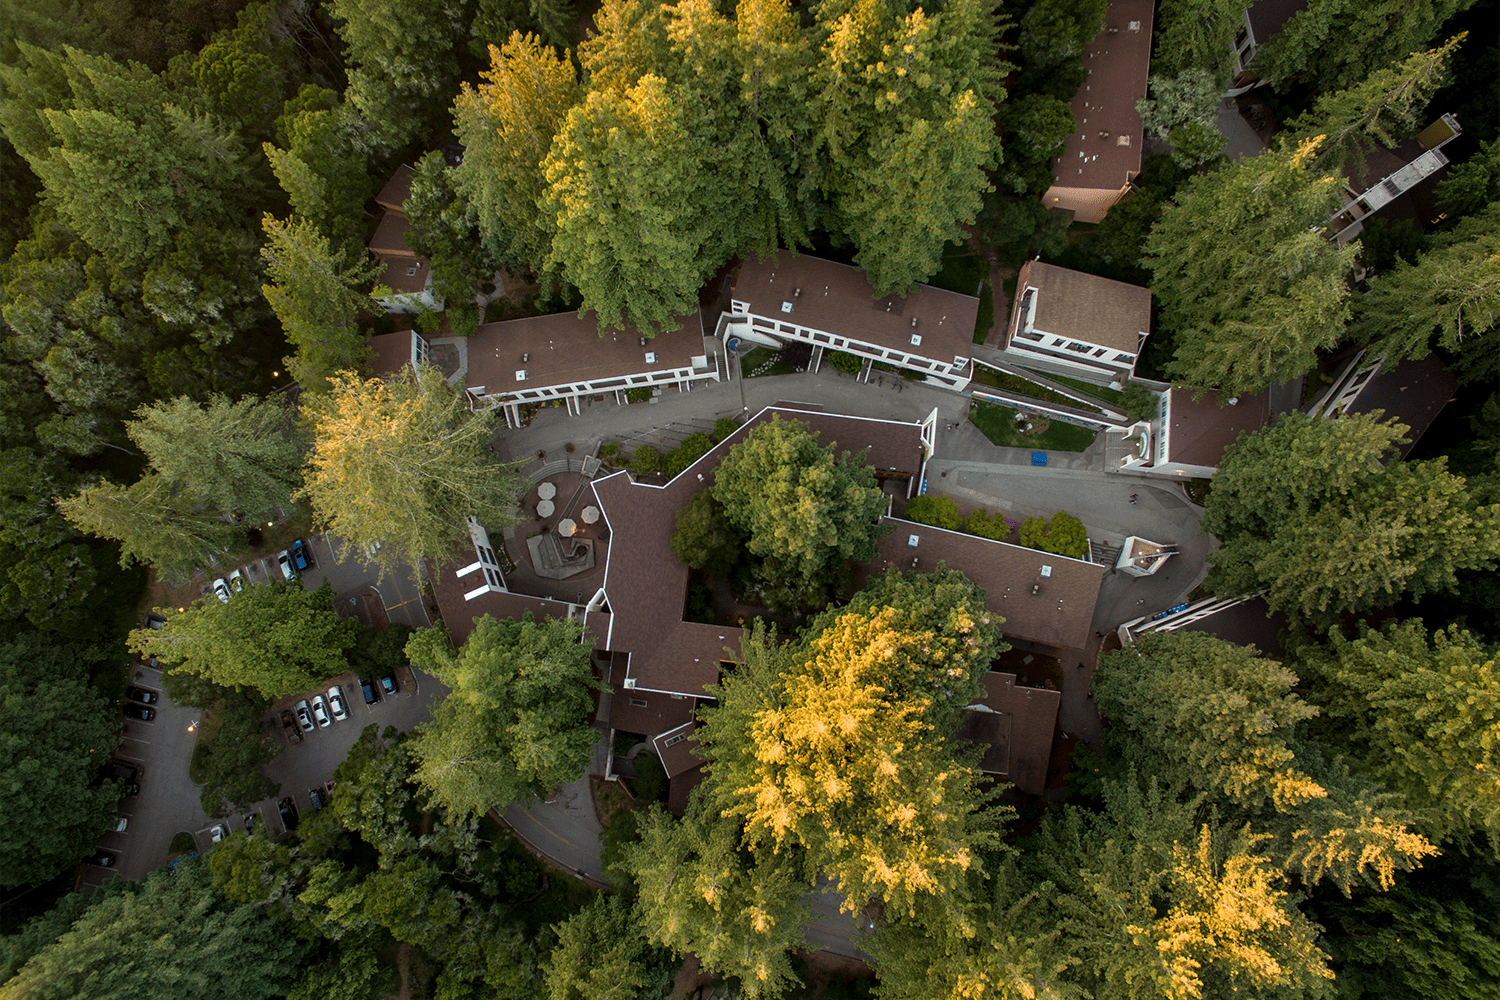 Aerial view of buildings with brown roofs, surrounded by trees